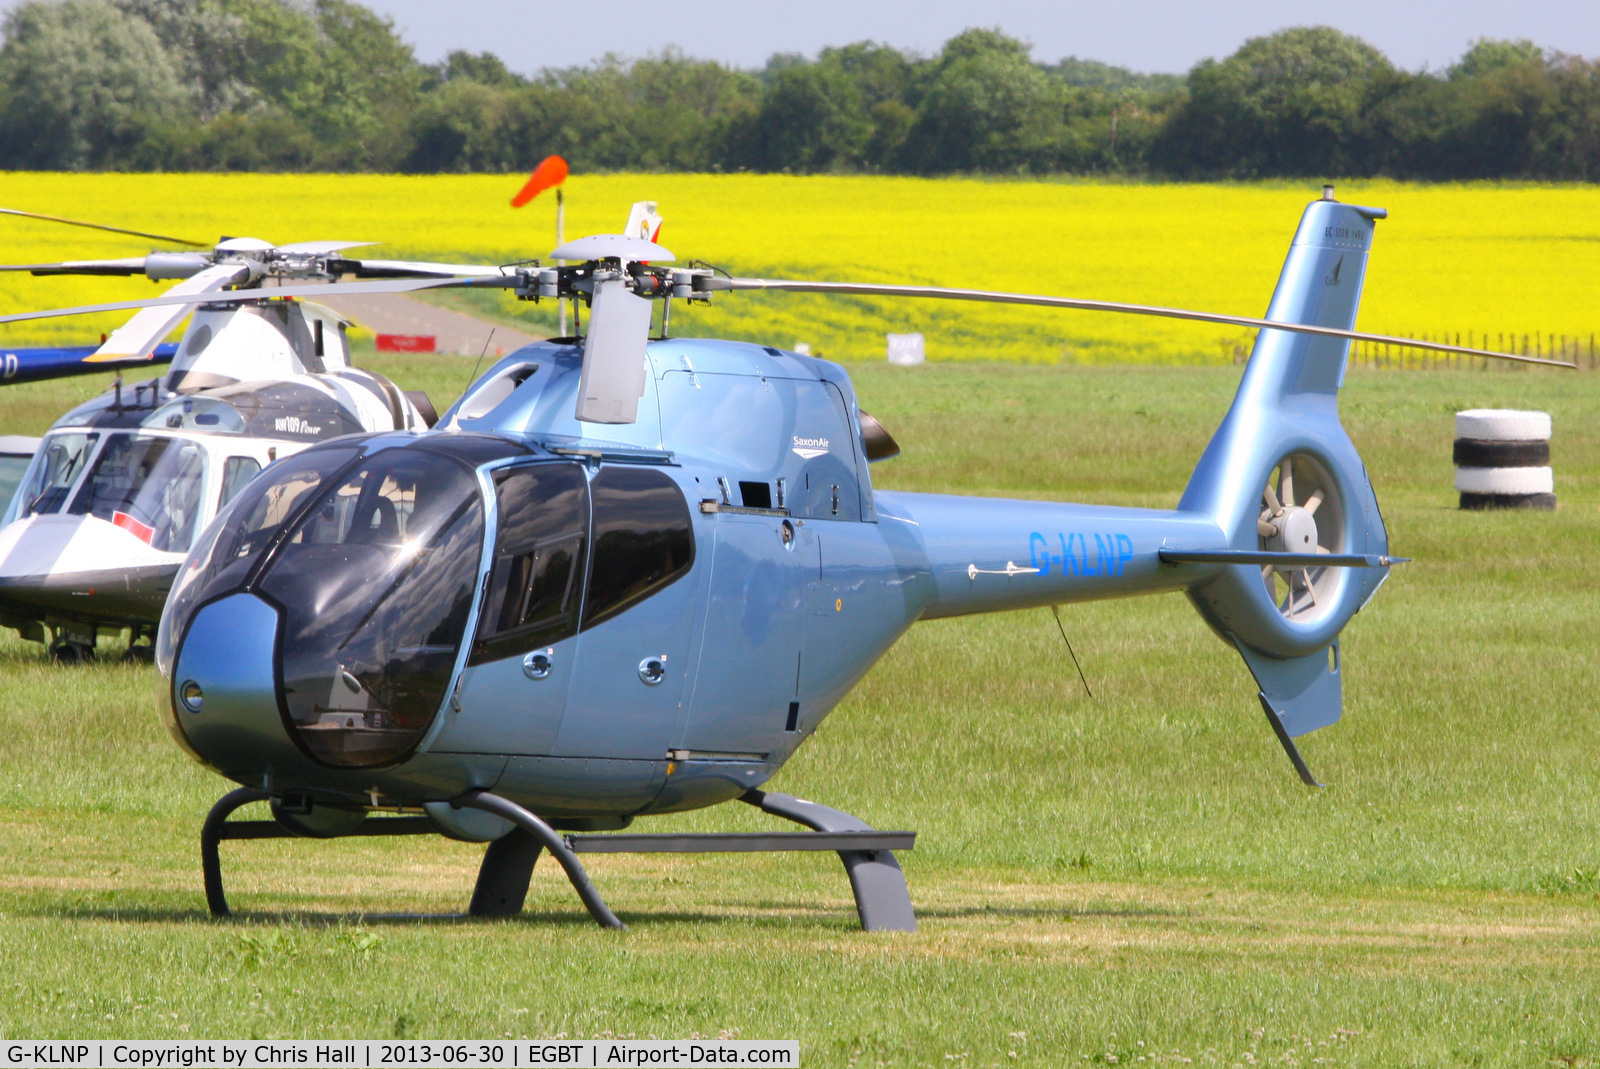 G-KLNP, 2007 Eurocopter EC-120B Colibri C/N 1492, being used for ferrying race fans to the British F1 Grand Prix at Silverstone